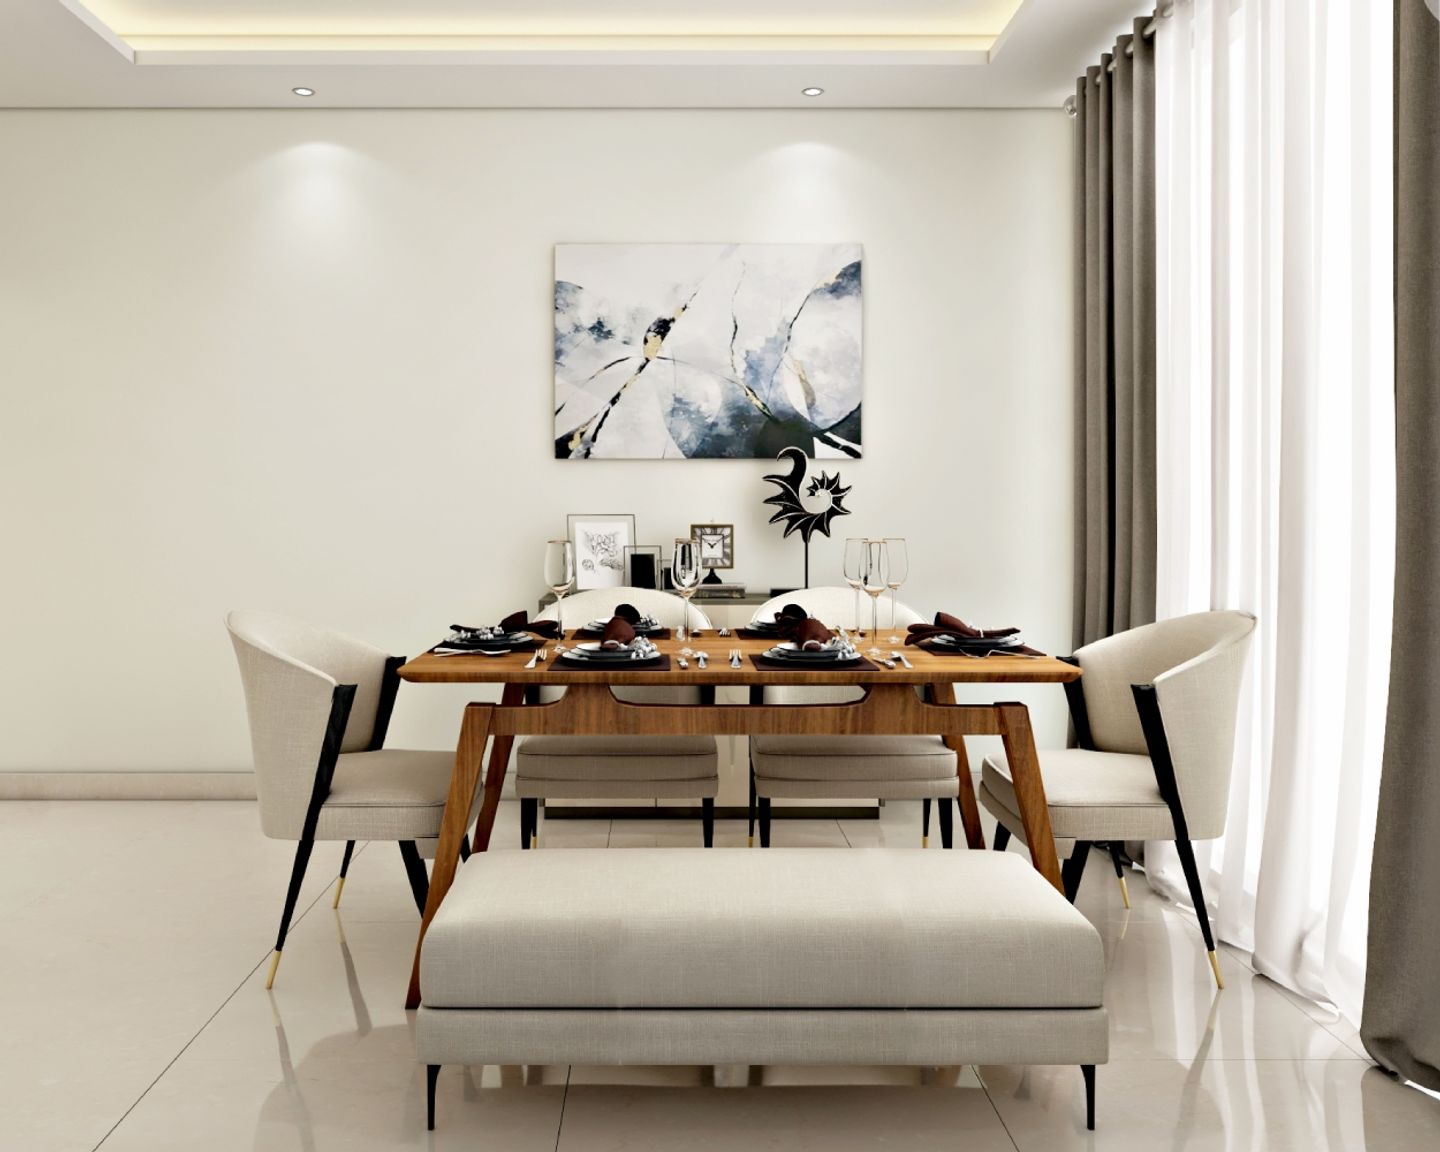 Minimalistic Dining Room Design With 4-Seater Wood And Beige Dining Table With Black Legs, Off-White Seater And Crockery Storage - Livspace	https://gran.livspace.com/editor/content?id=65fcfe5d675bf35d01312d24